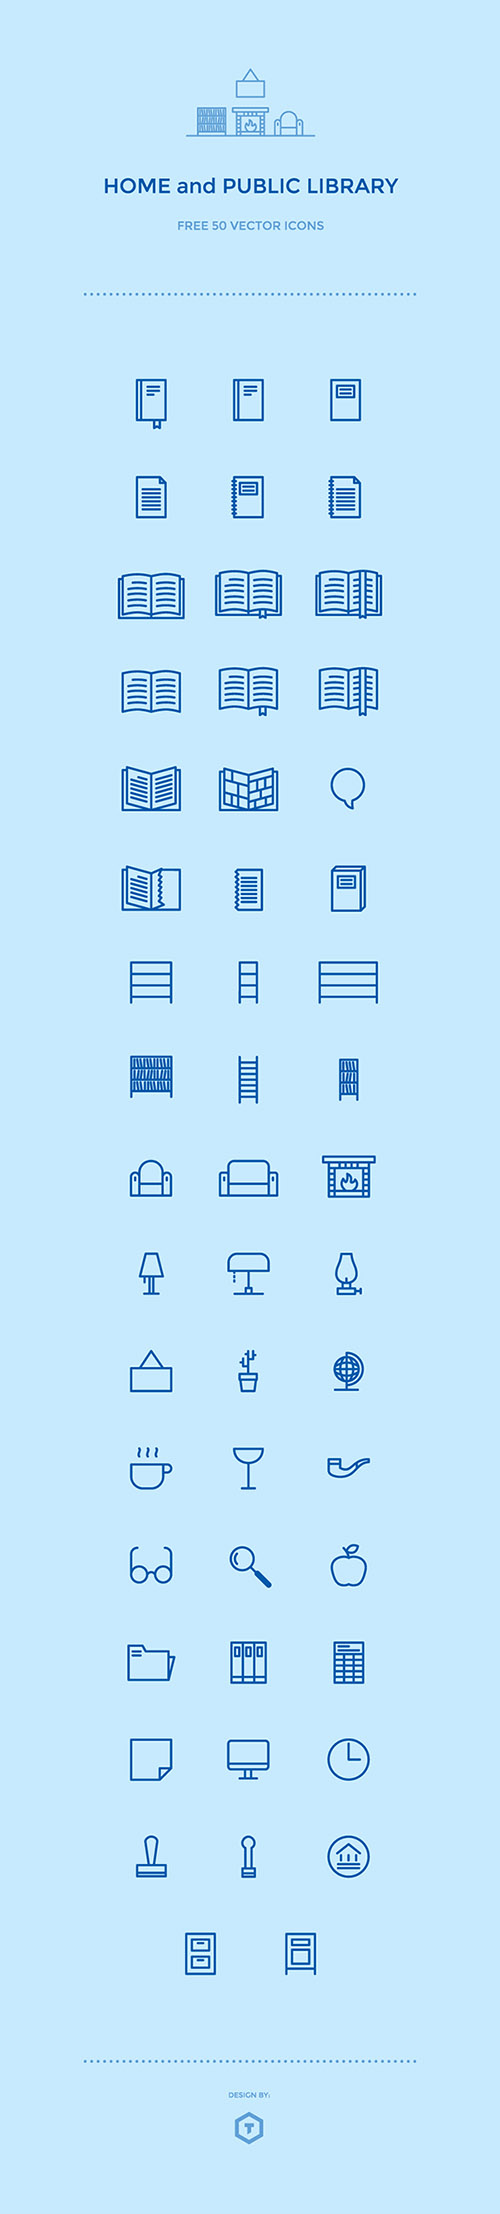 AI Web Icons - 50 Home and Library Icons